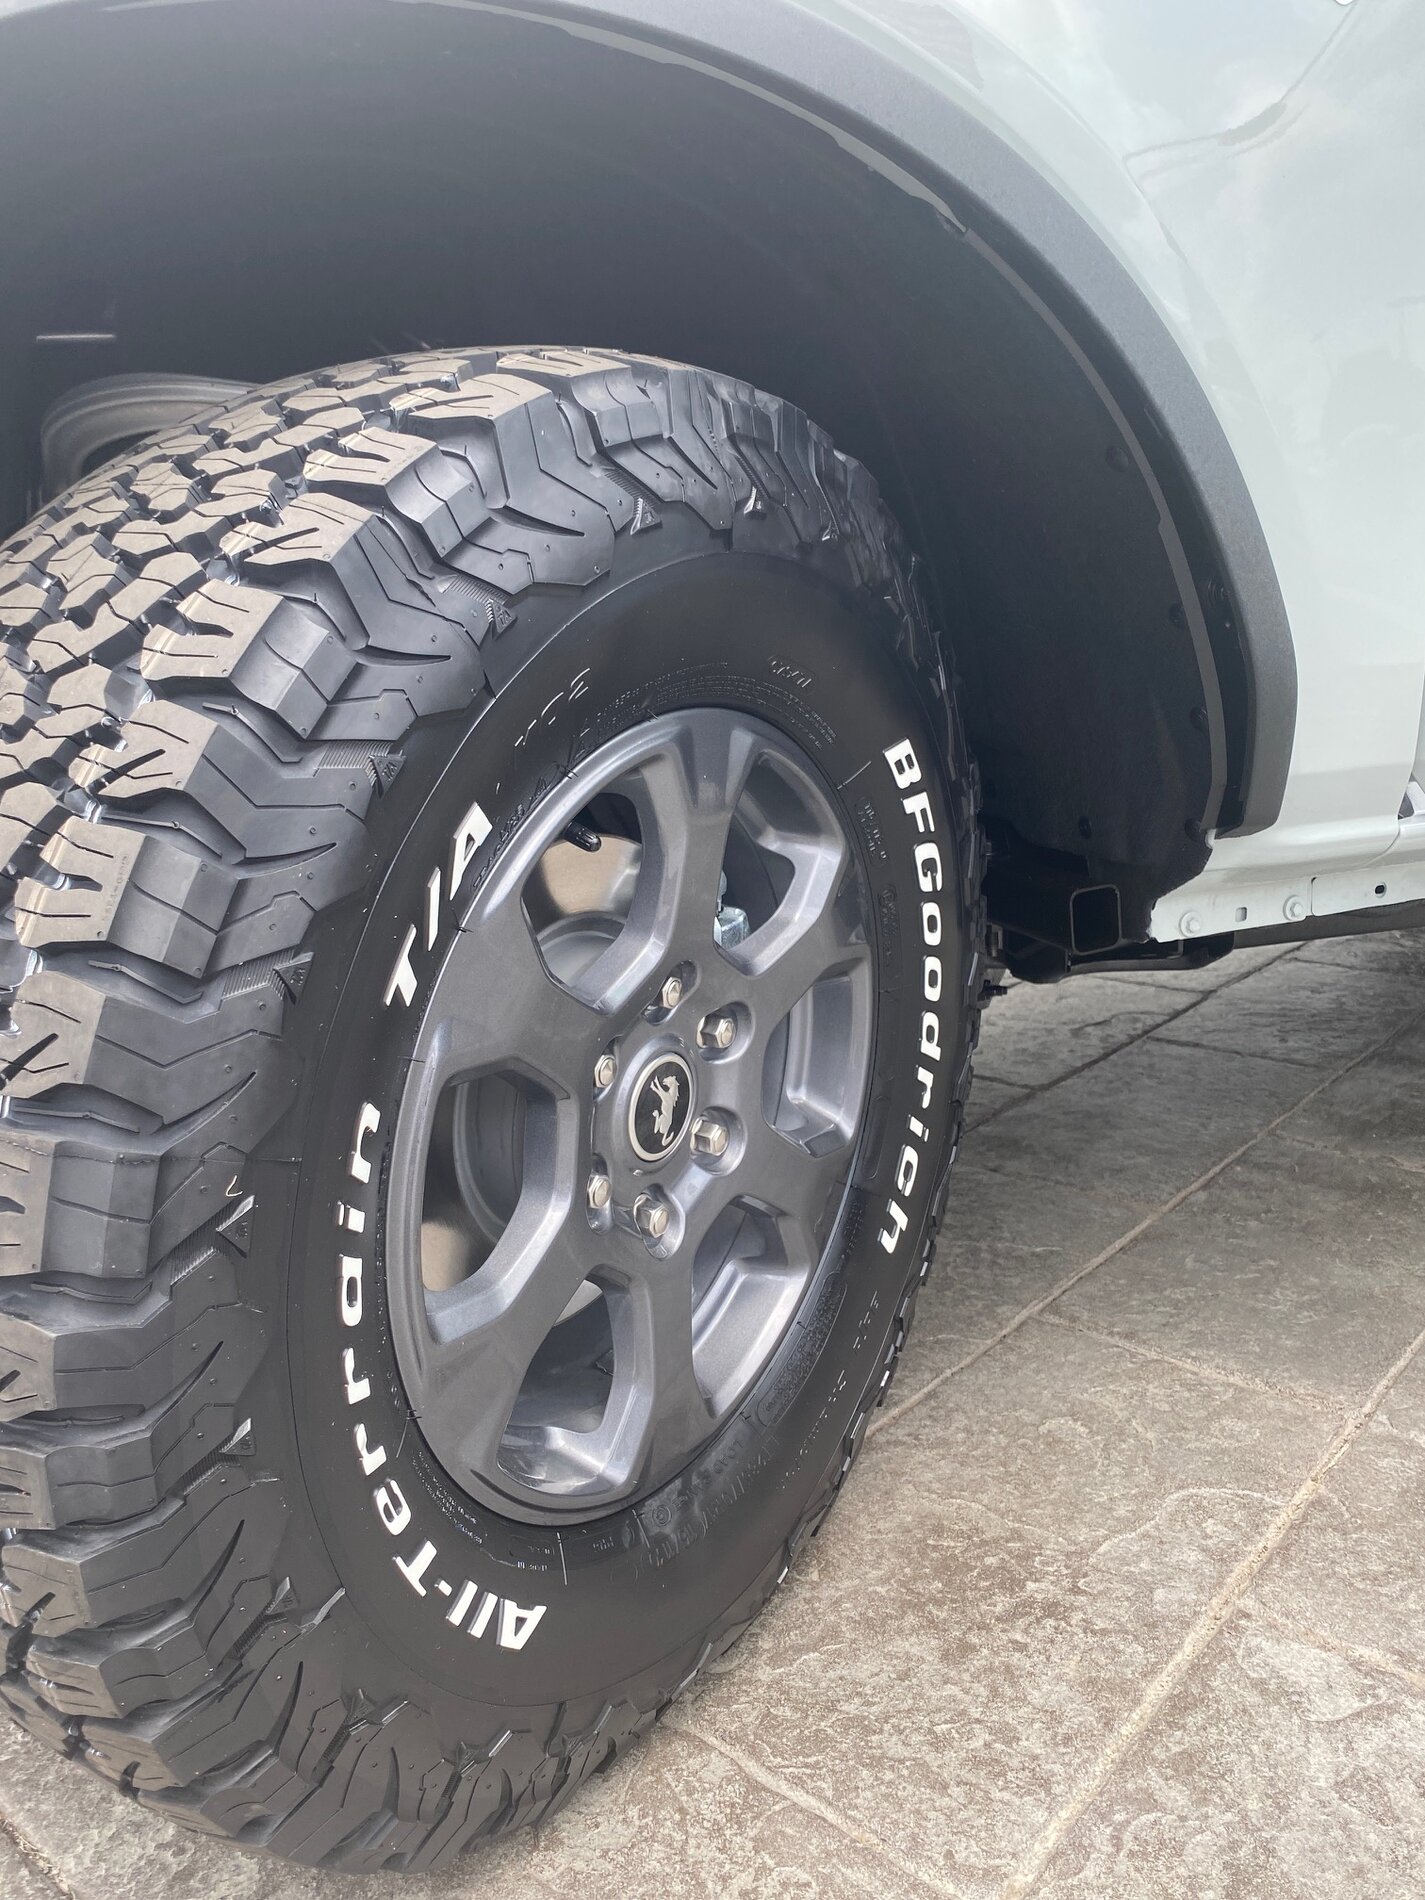 Ford Bronco 33's tires fit Big Bend! As tested on my 2021 Bronco 61E342FA-507C-43CF-9C5A-F4DC25D94C03